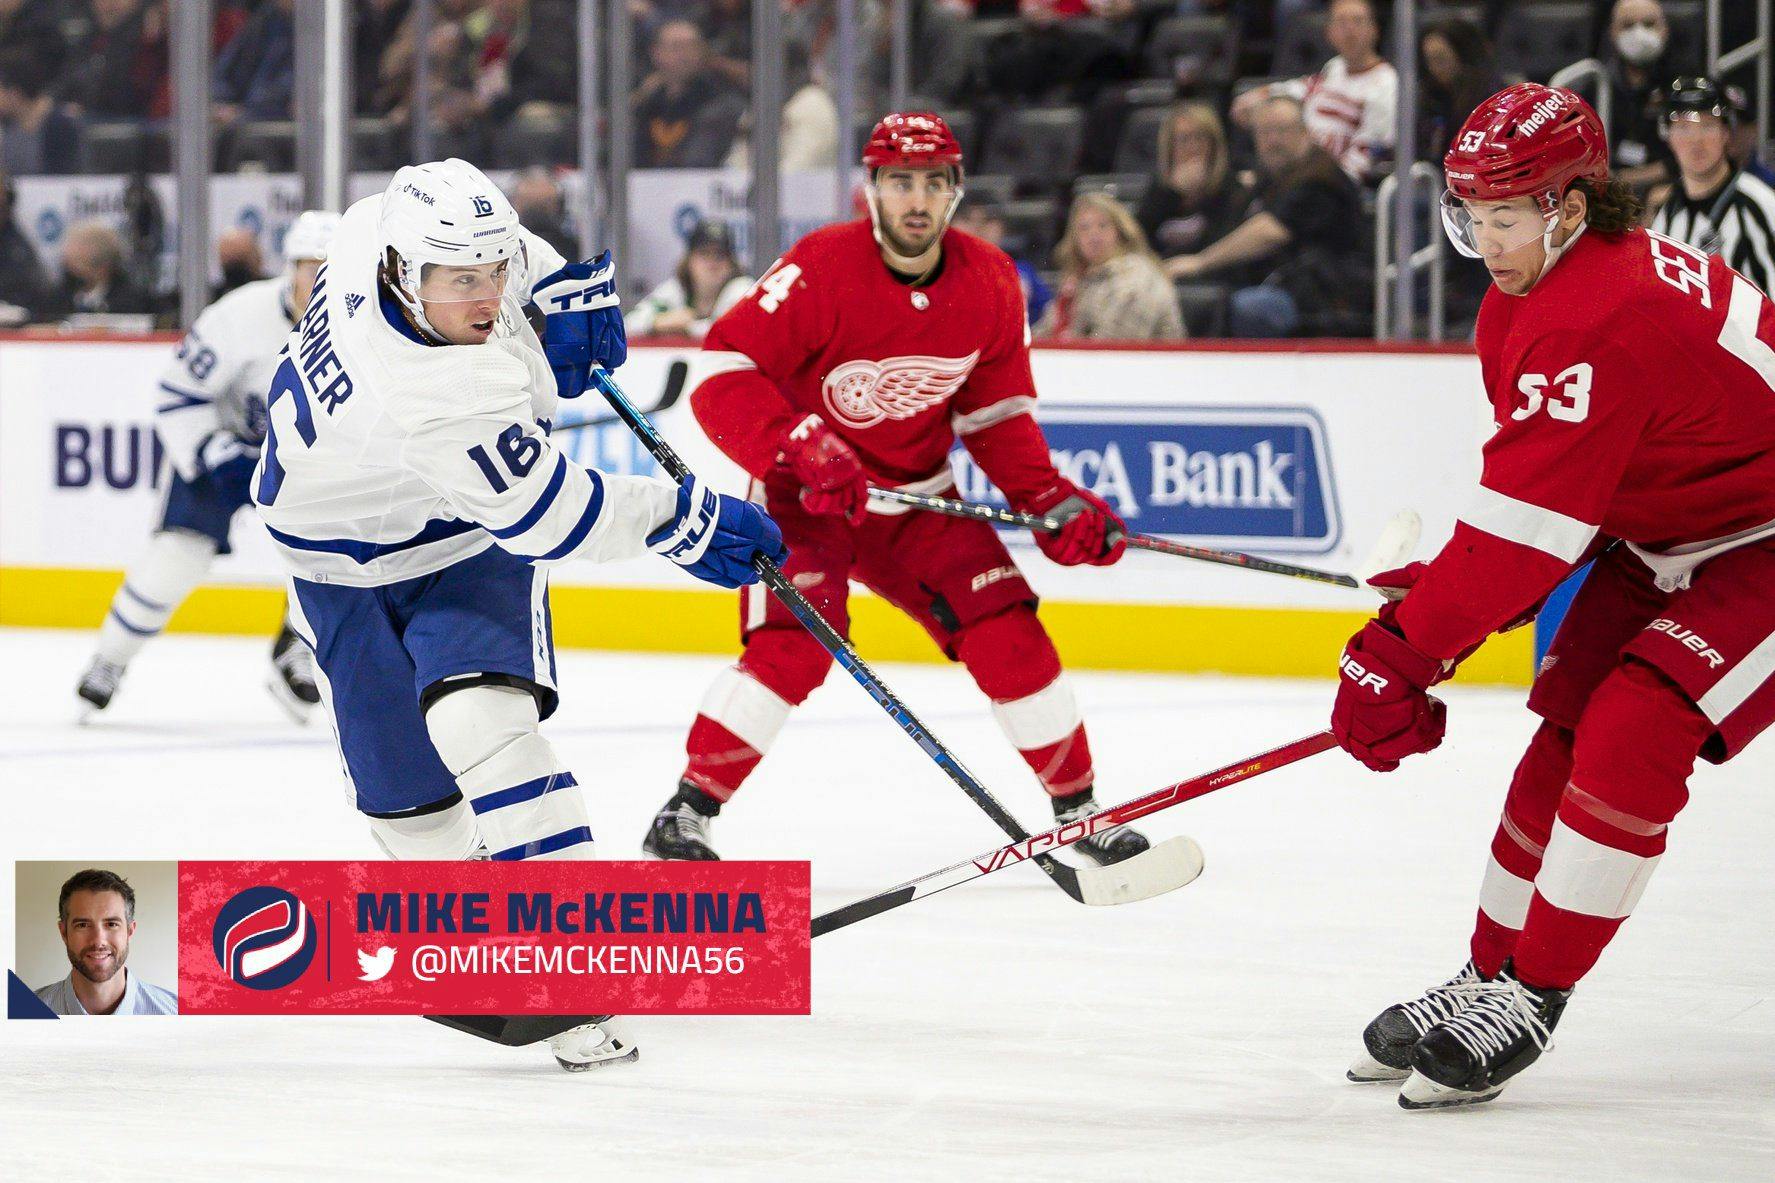 The Leafs vs Red Wings blowout was fun for the fans, maybe not so much for the players